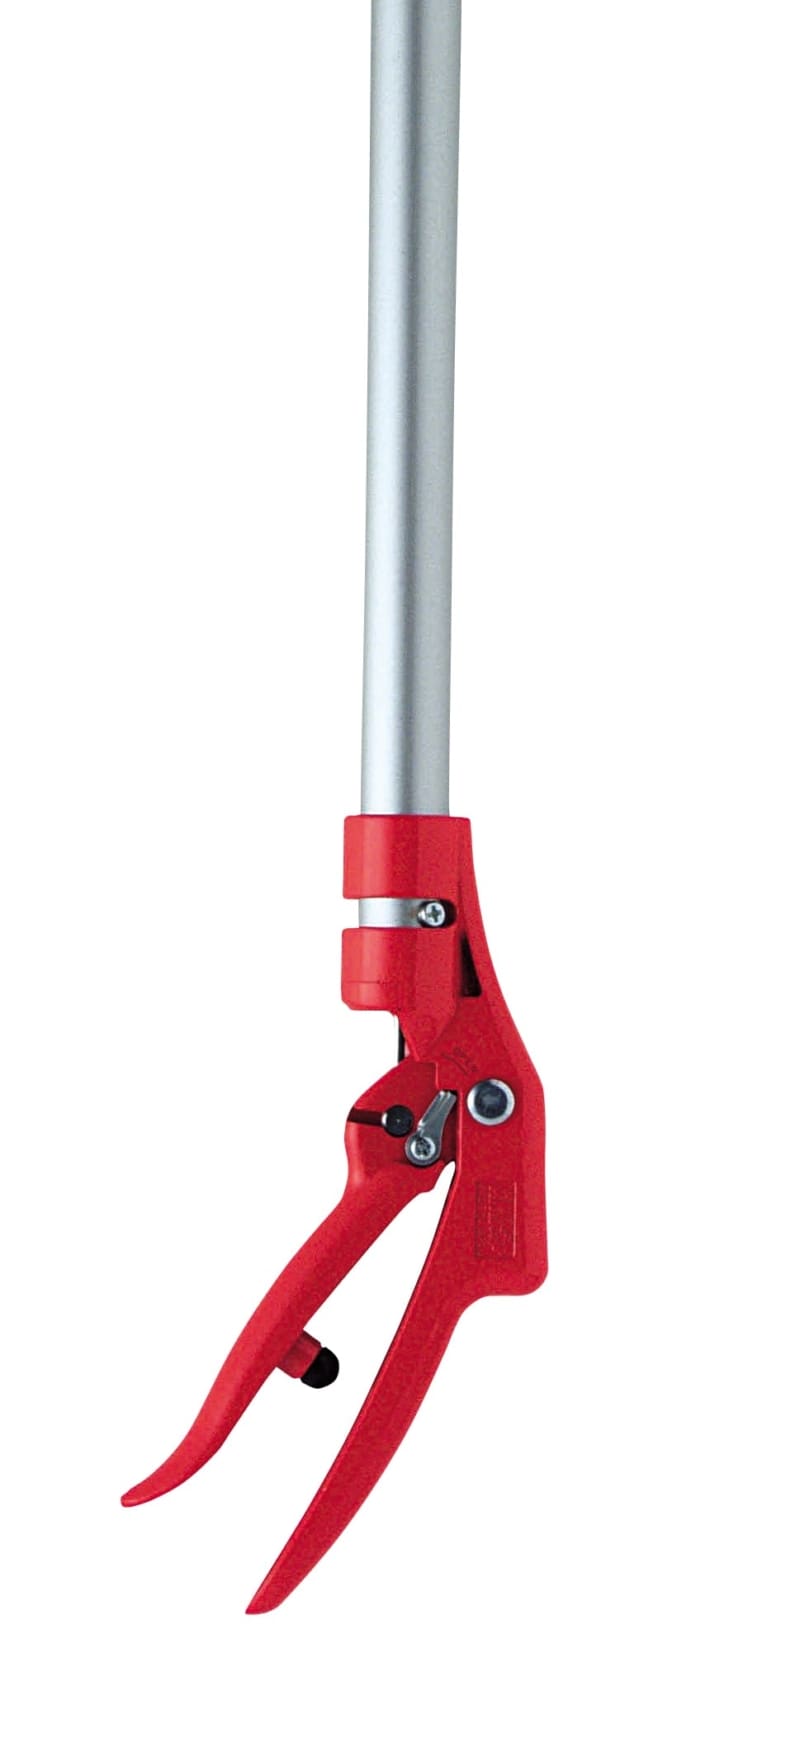 ARS 160 Long Reach Cut and Hold Pruner